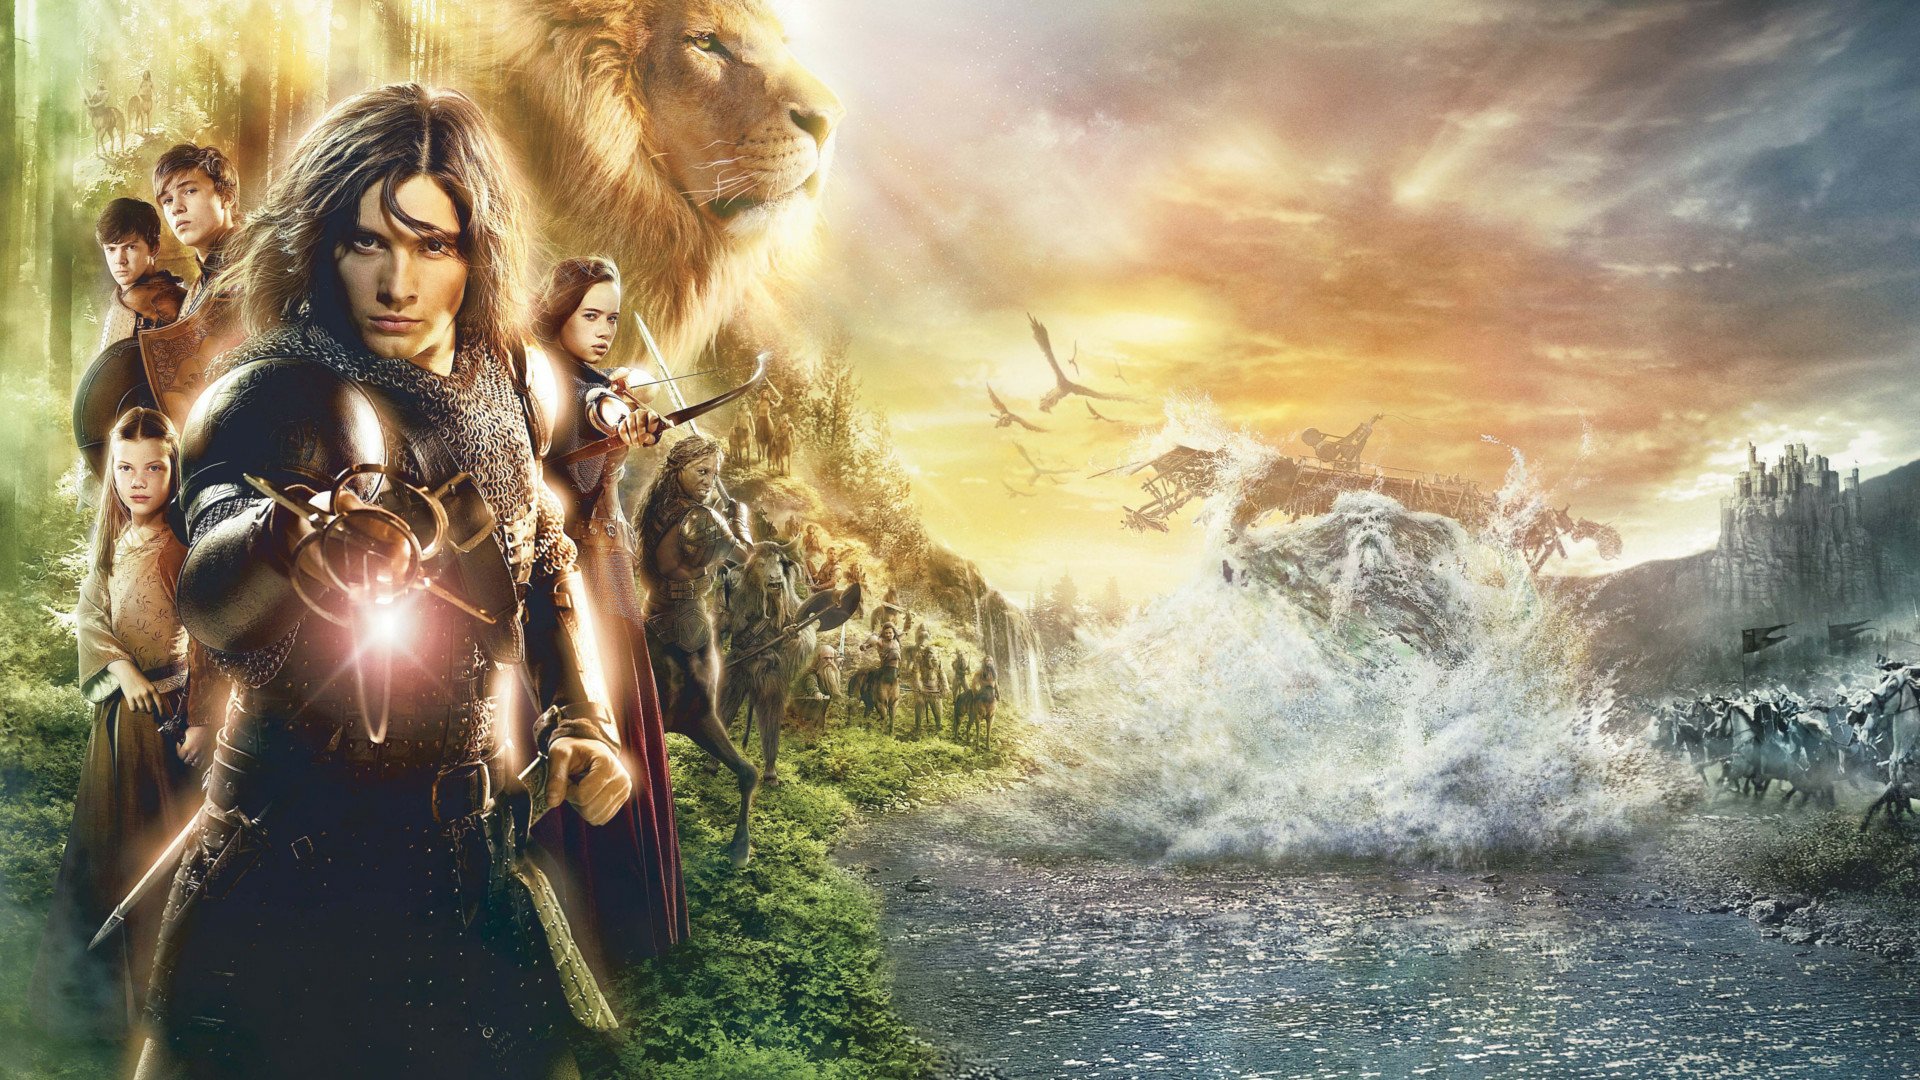 Download The Chronicles Of Narnia 2 Sub Indo